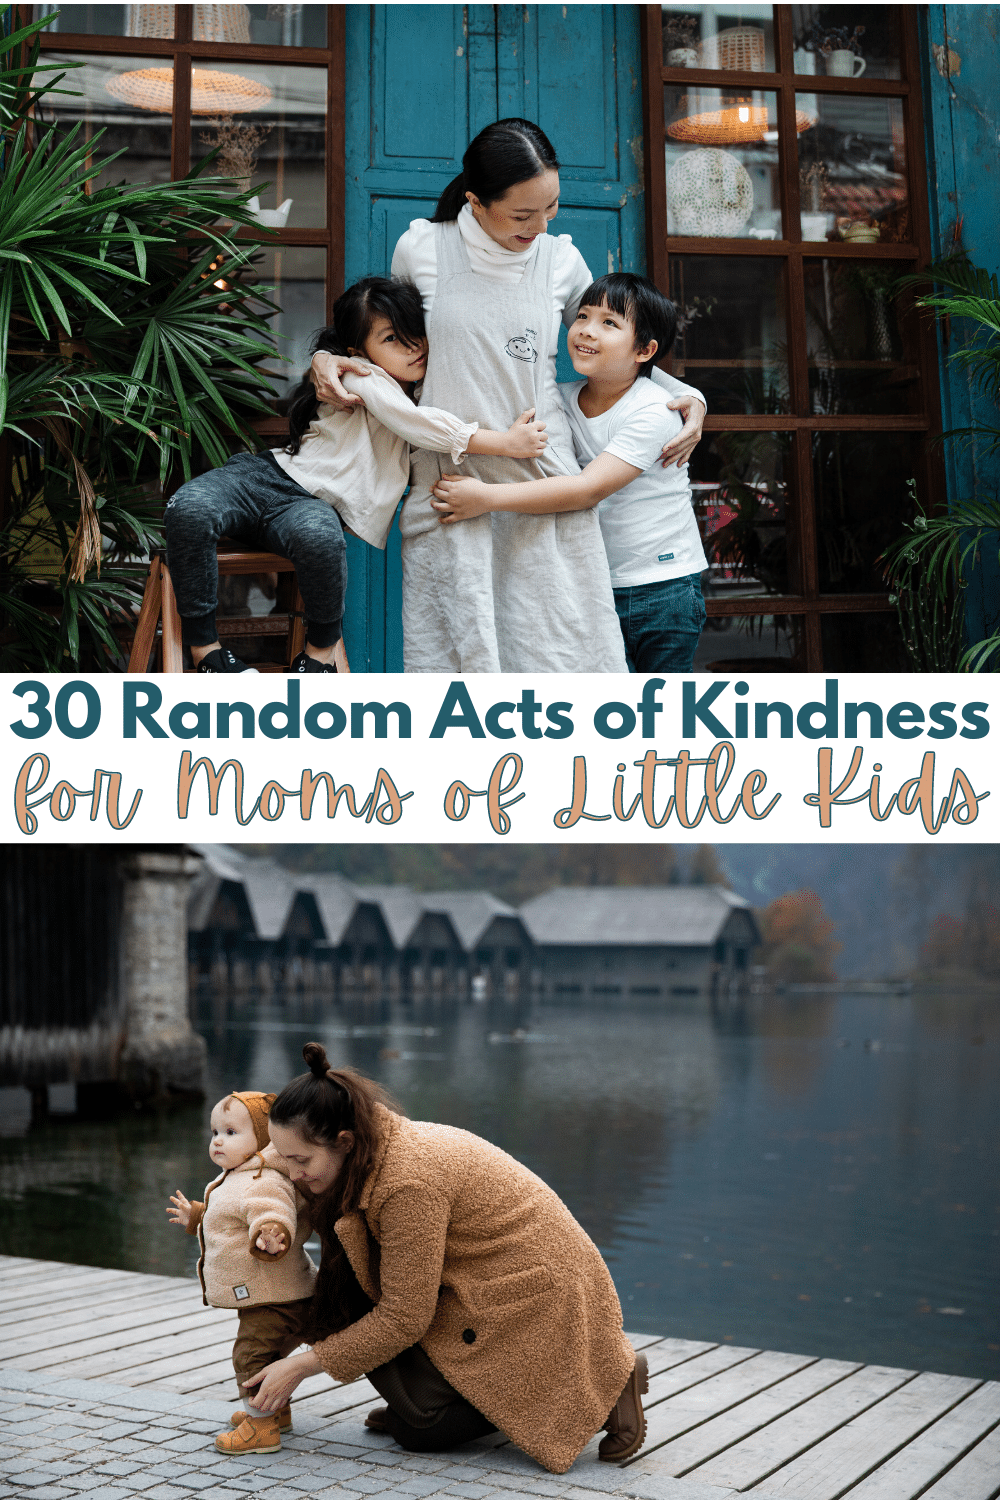 Spread kindness to moms of small children with these 30 random acts of kindness to inspire compassion, support and camaraderie. #randomactsofkindness #formoms #momlife via @wondermomwannab